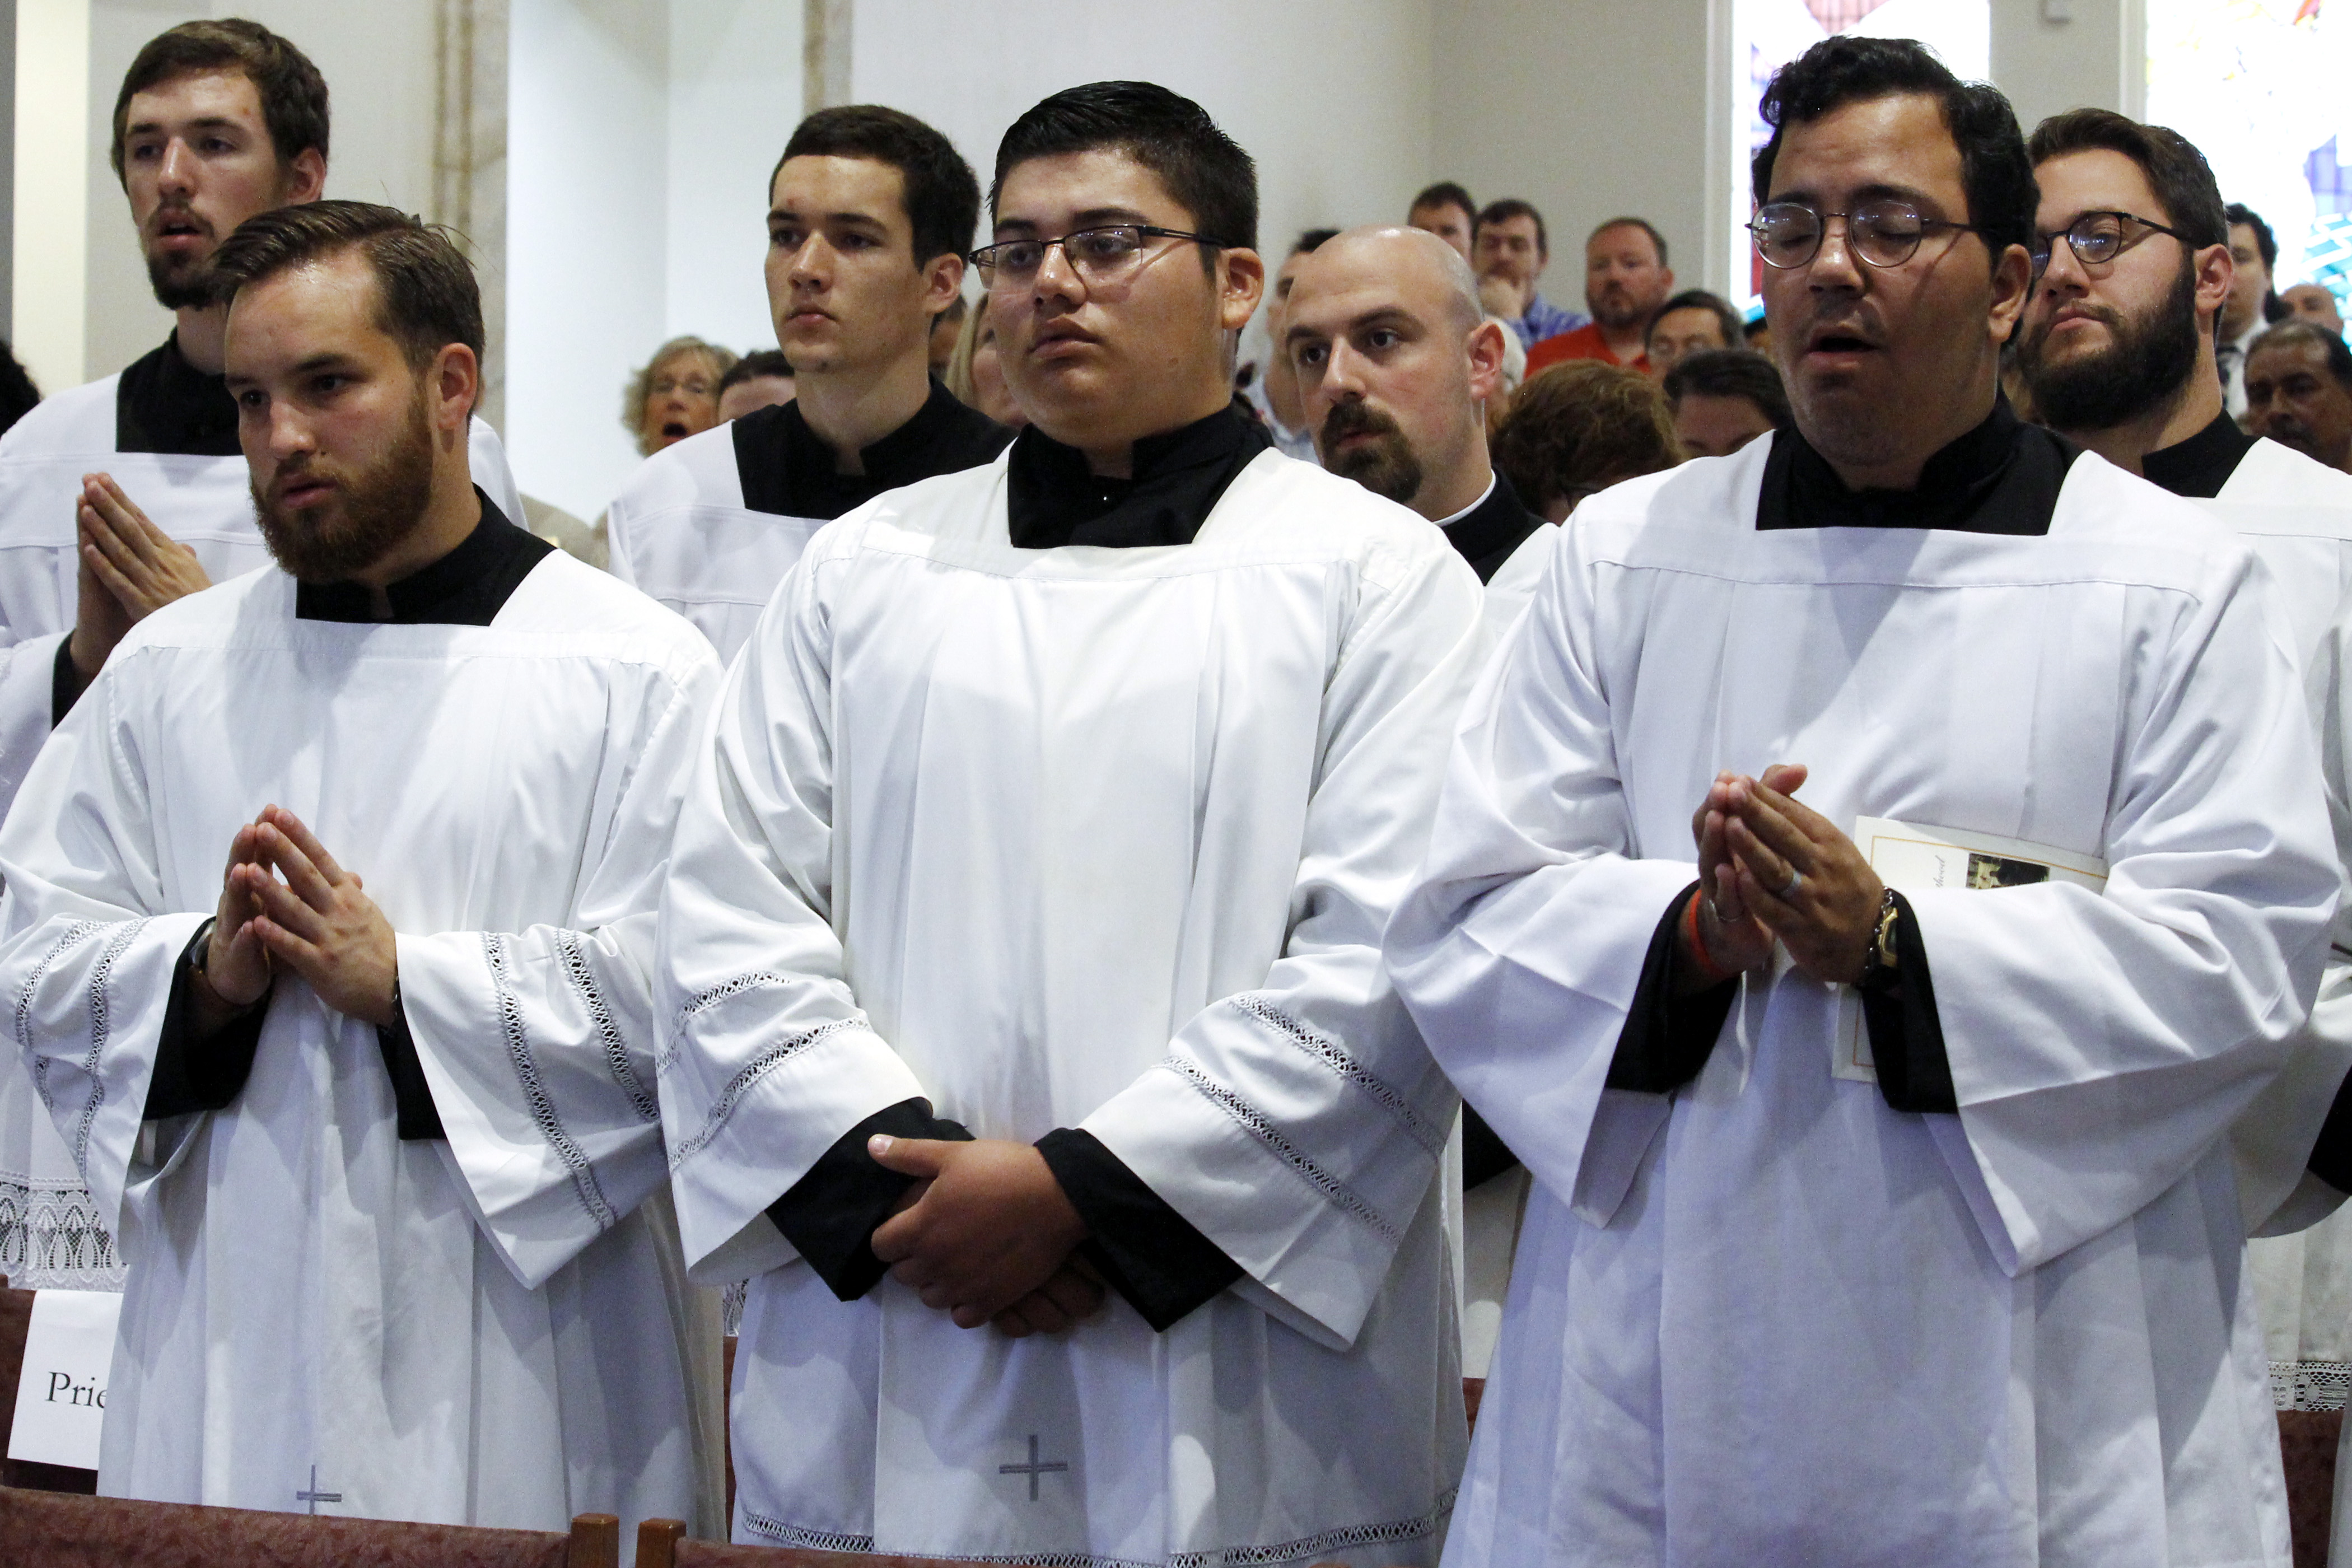 campaign-calls-catholics-to-support-seminarian-formation-together